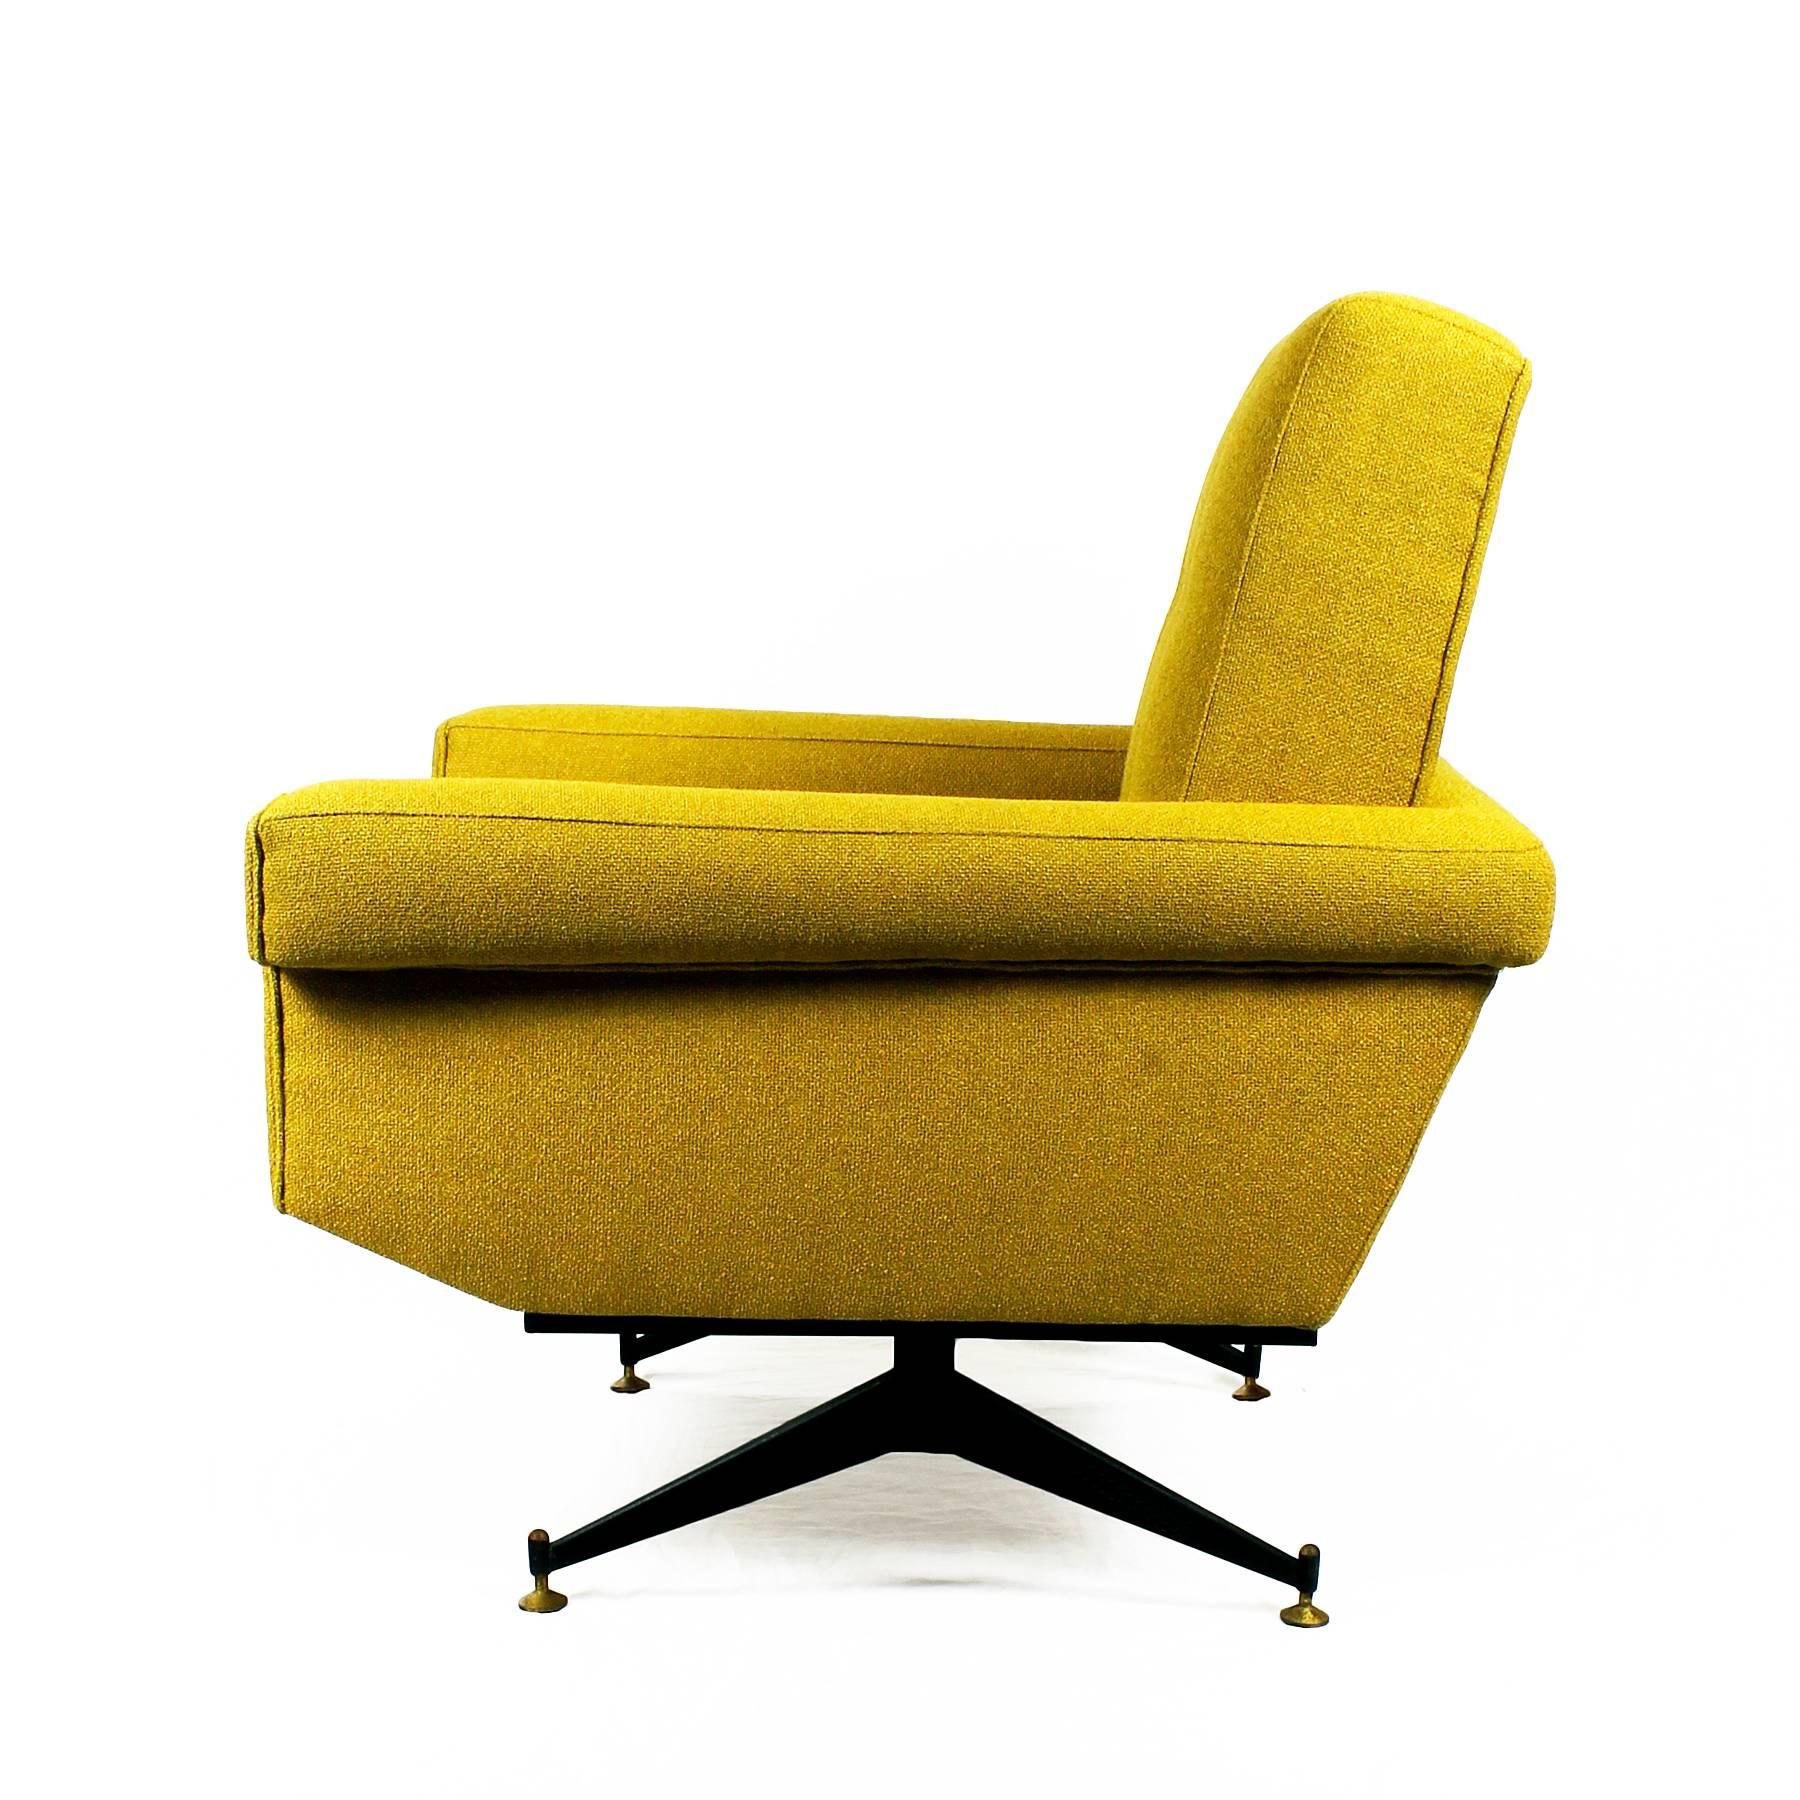 Pair of Mid-Century Modern Padded Armchairs With Yellow-Mustard Fabric - Italy In Good Condition For Sale In Girona, ES